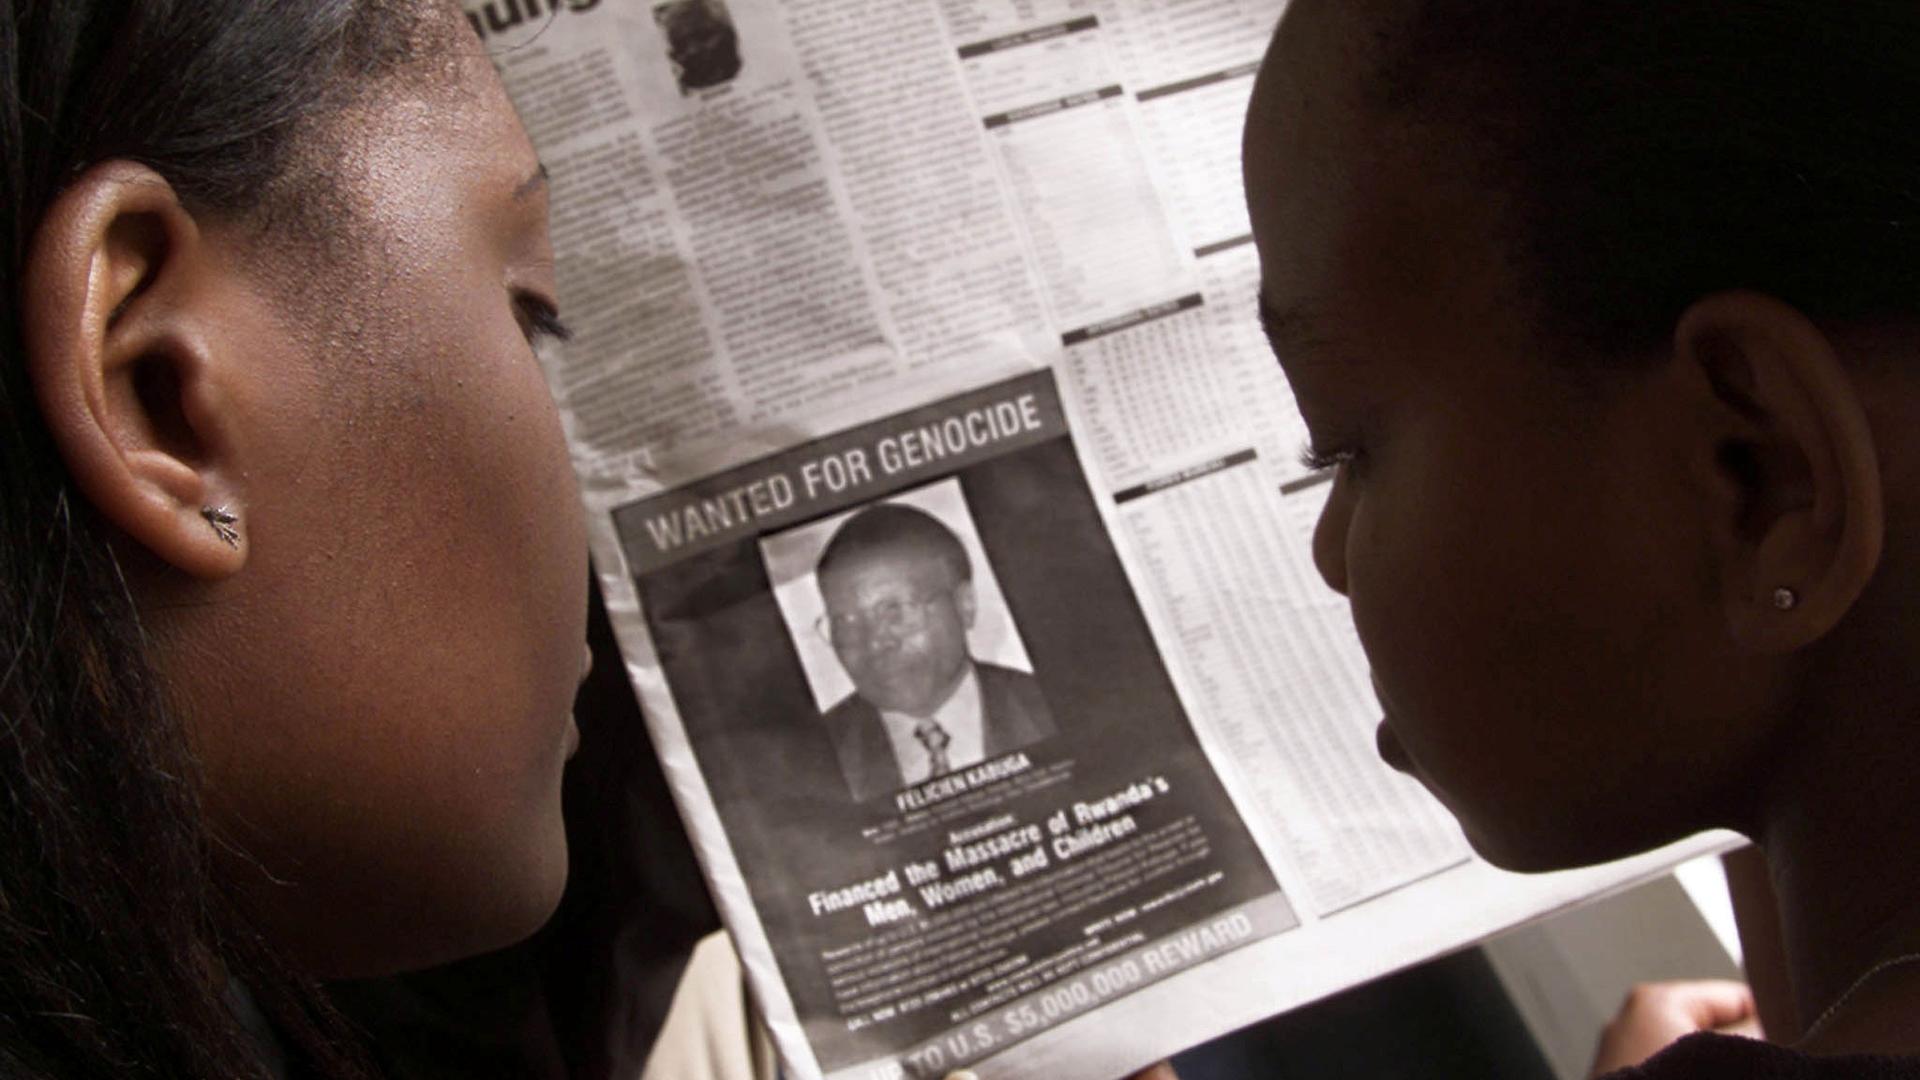 Two people are shown from behind looking at a newspaper featuring a photograph of Rwandan Felicien Kabuga.